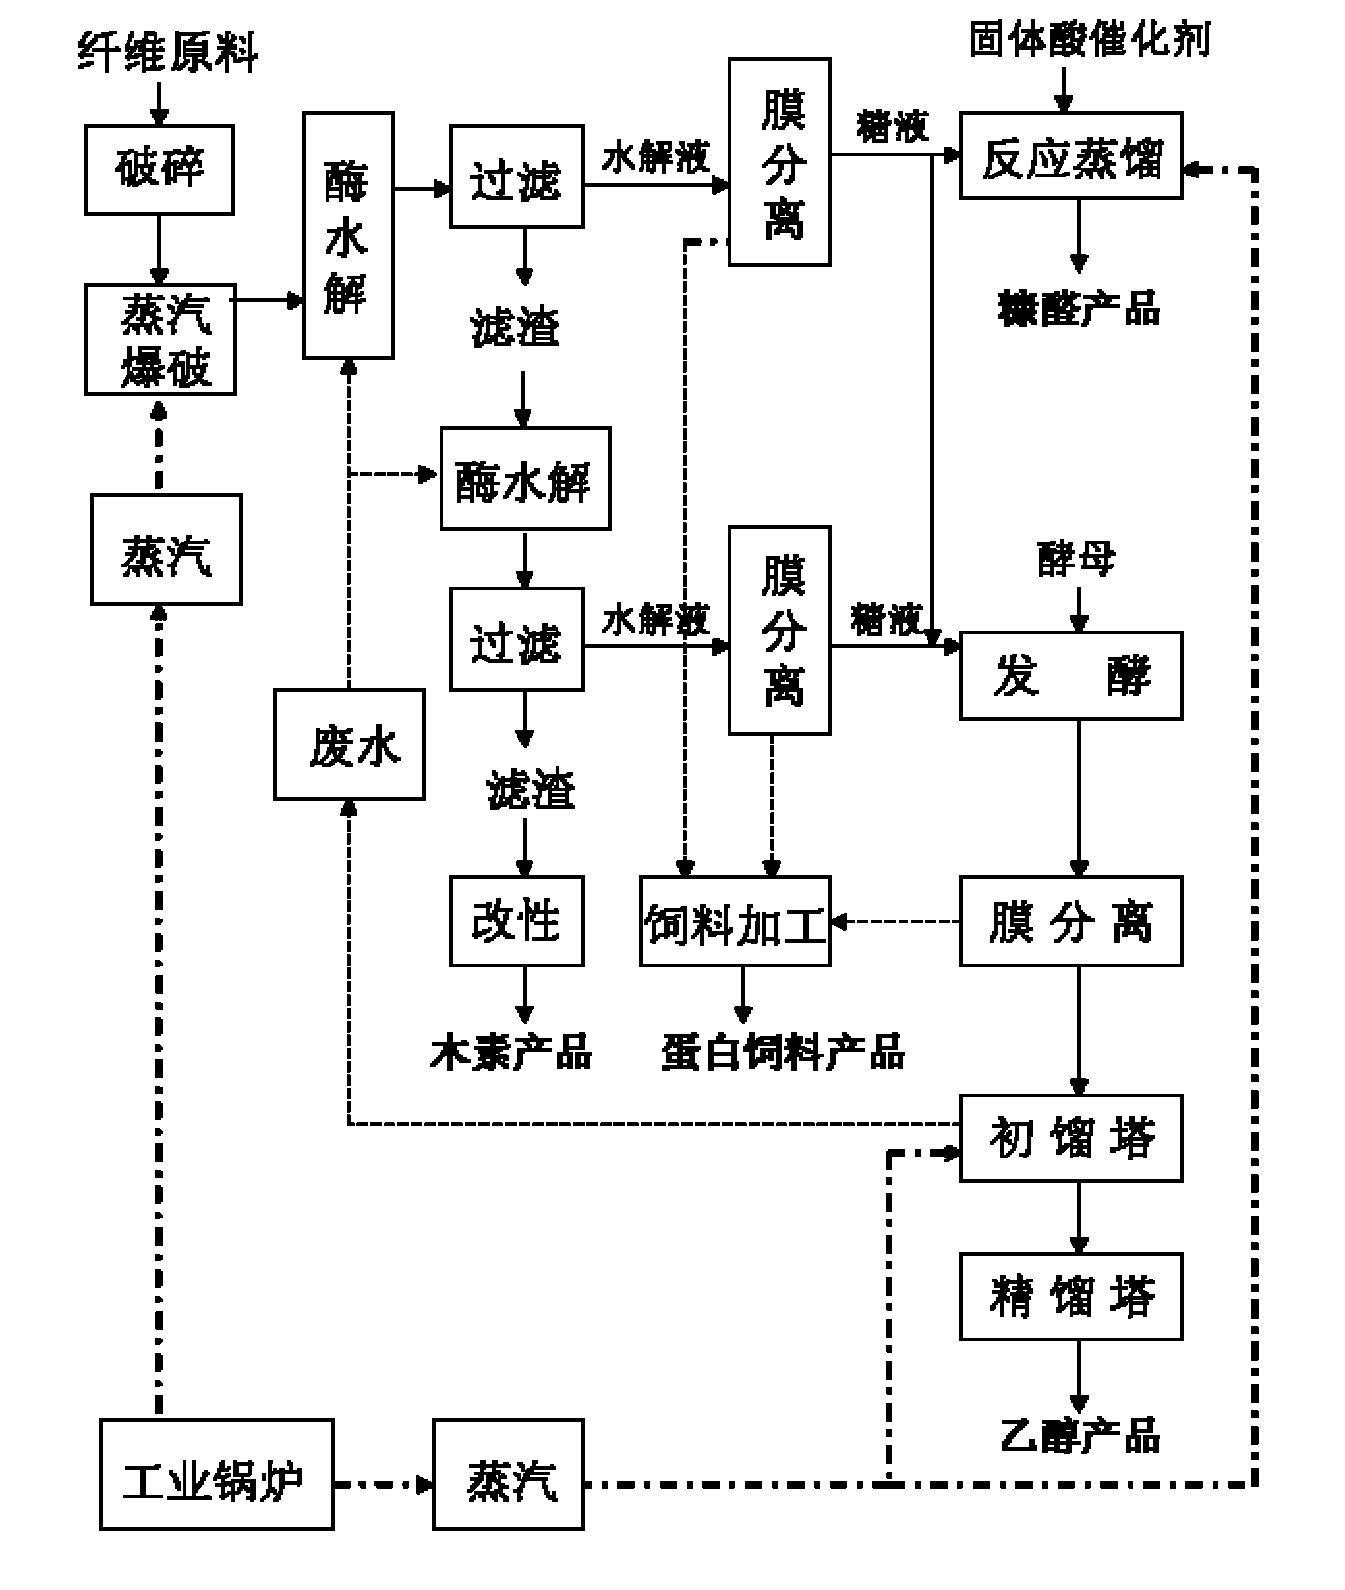 Method for coproducing cellulosic ethanol, furfural, lignin and feed from plant fibers